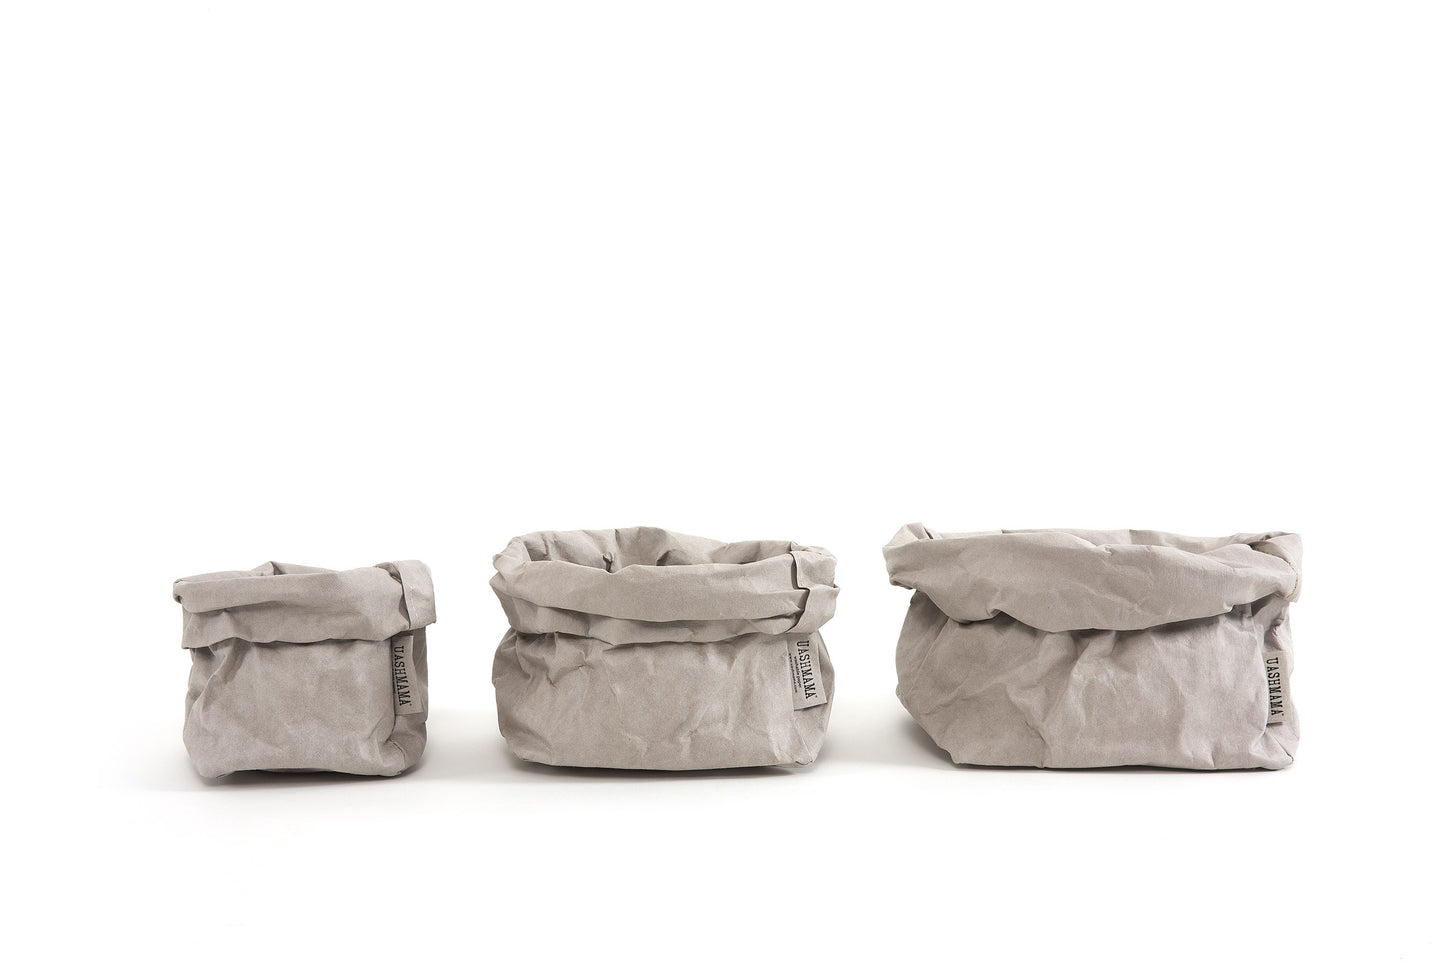 A small, medium and large paper bag in pale grey are lined up in size order from small to large.